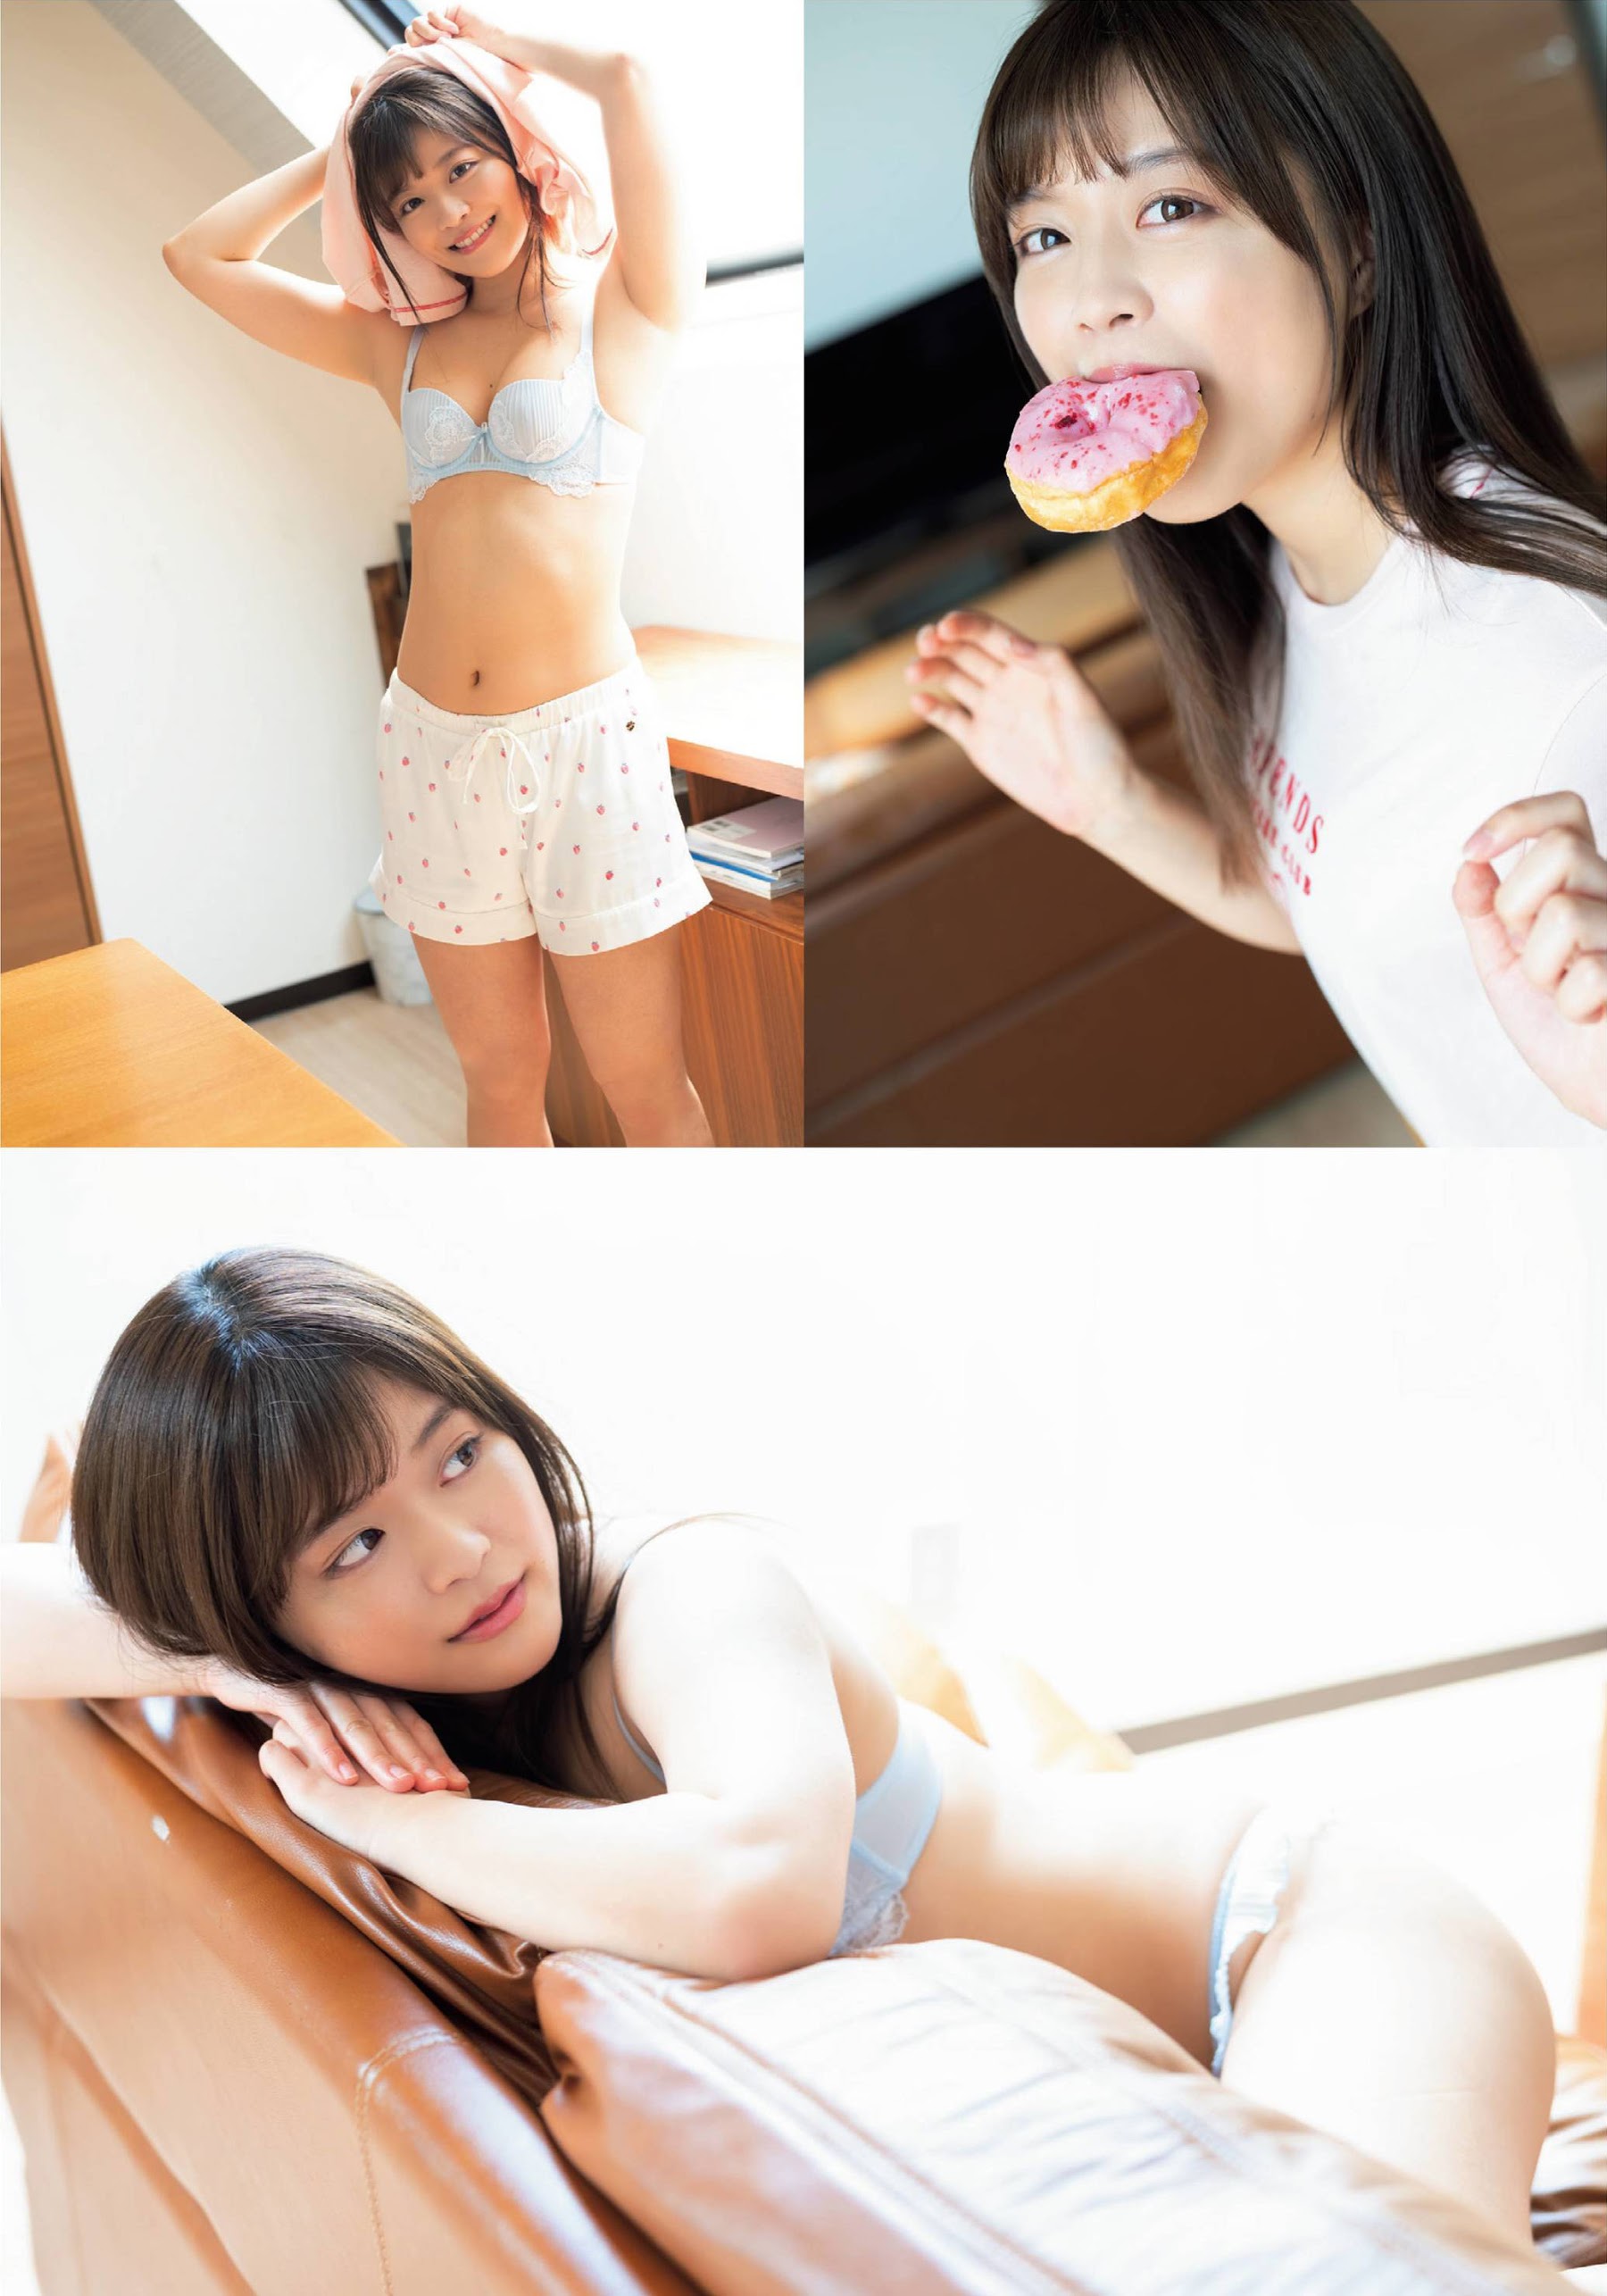 Kanon Kanon Hair Nude Image A Celebrity Lookalike!The miracle fresher beauty who came to Tokyo from Kyushu to find a job takes off her suit and washes her body2020004